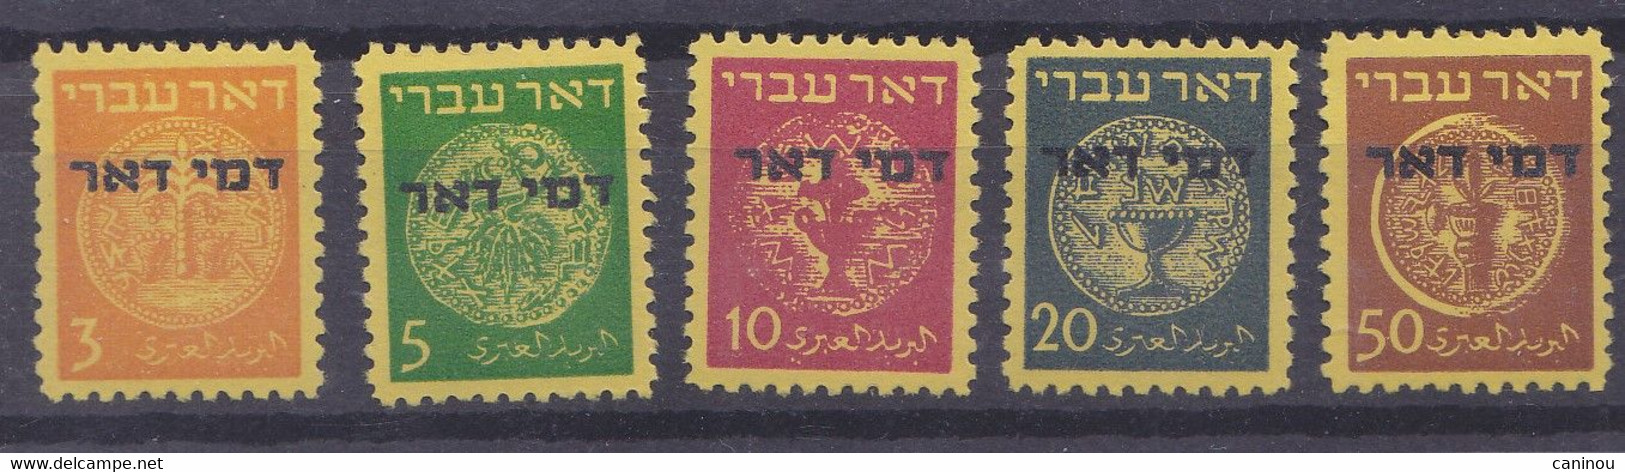 ISRAEL TIMBRES TAXE 1948 Y & T 1-5 MONNAIES ANCIENNES NEUFS TRACES CHARNIERES - Strafport